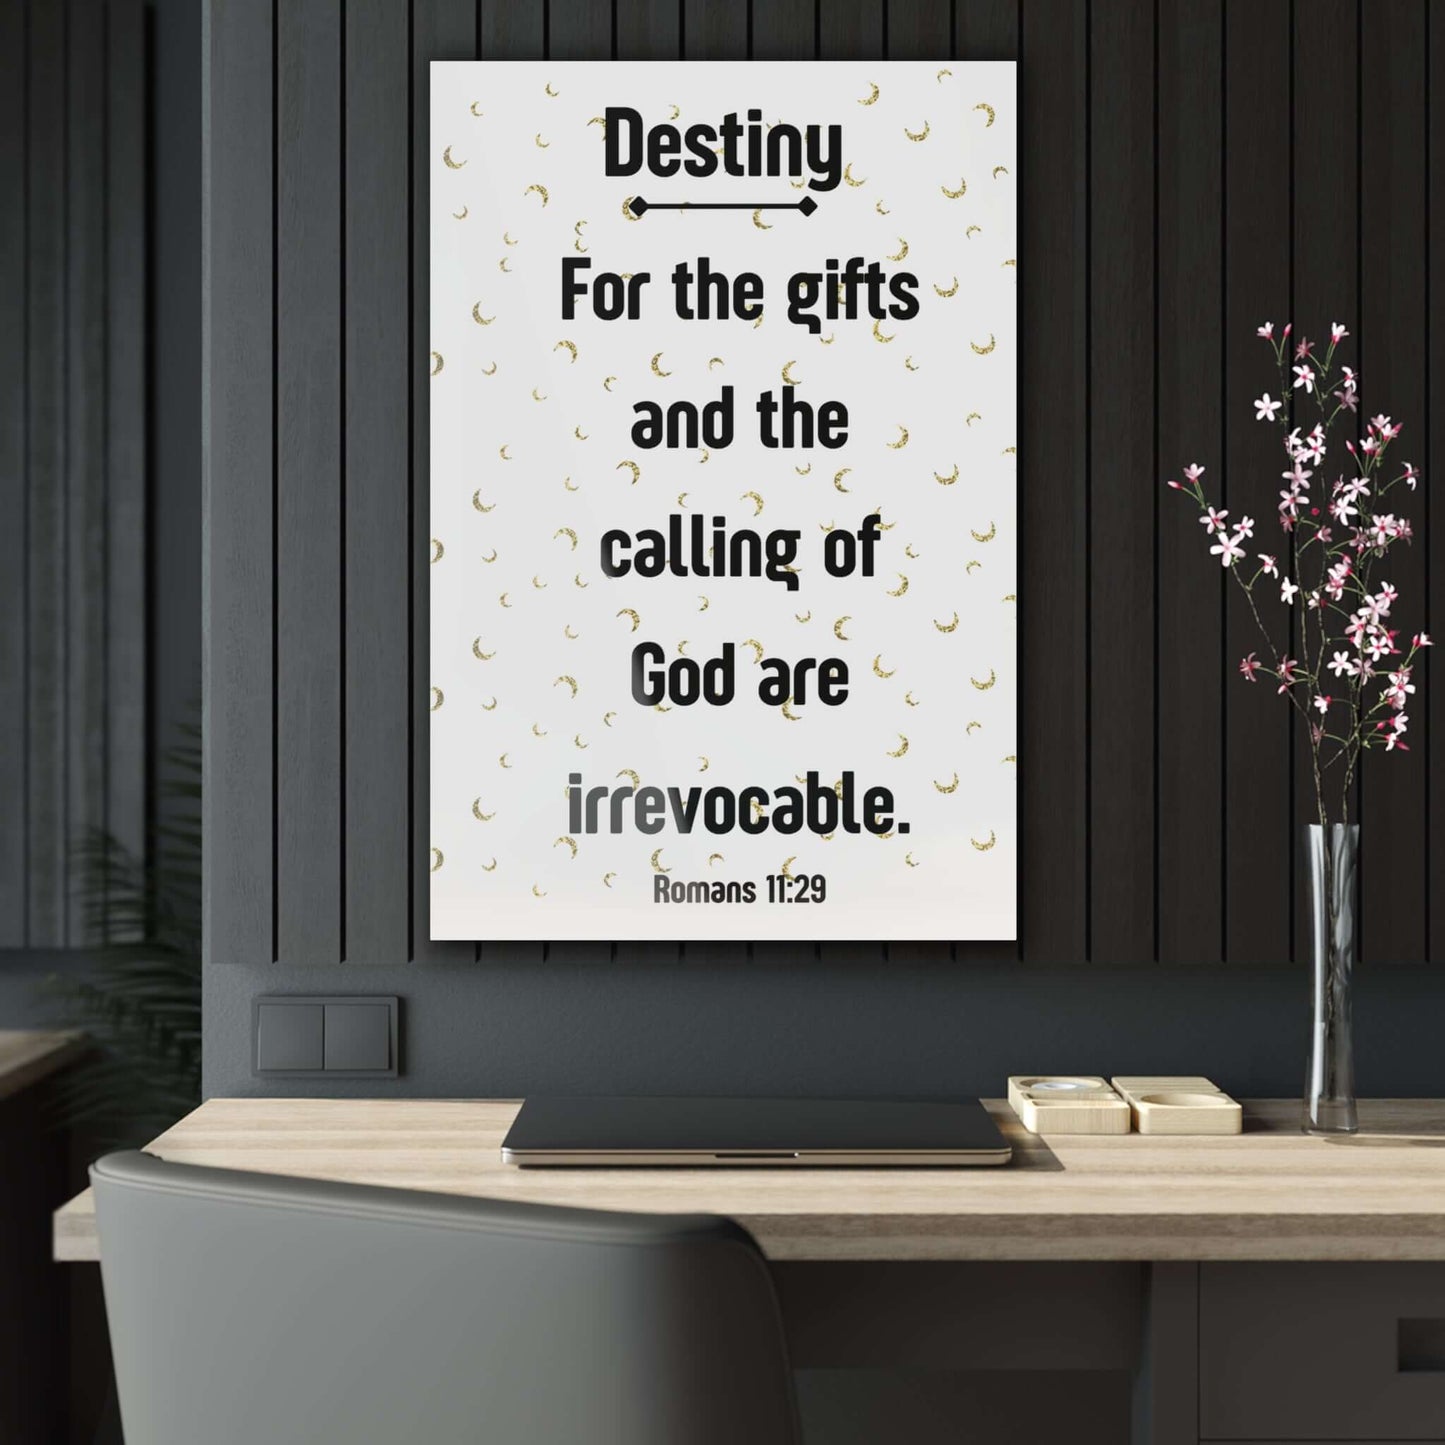 Family Wall Decor - Acrylic Print with Inspirational Scripture | Art & Wall Decor,Assembled in the USA,Assembled in USA,Decor,Home & Living,Home Decor,Indoor,Made in the USA,Made in USA,Poster